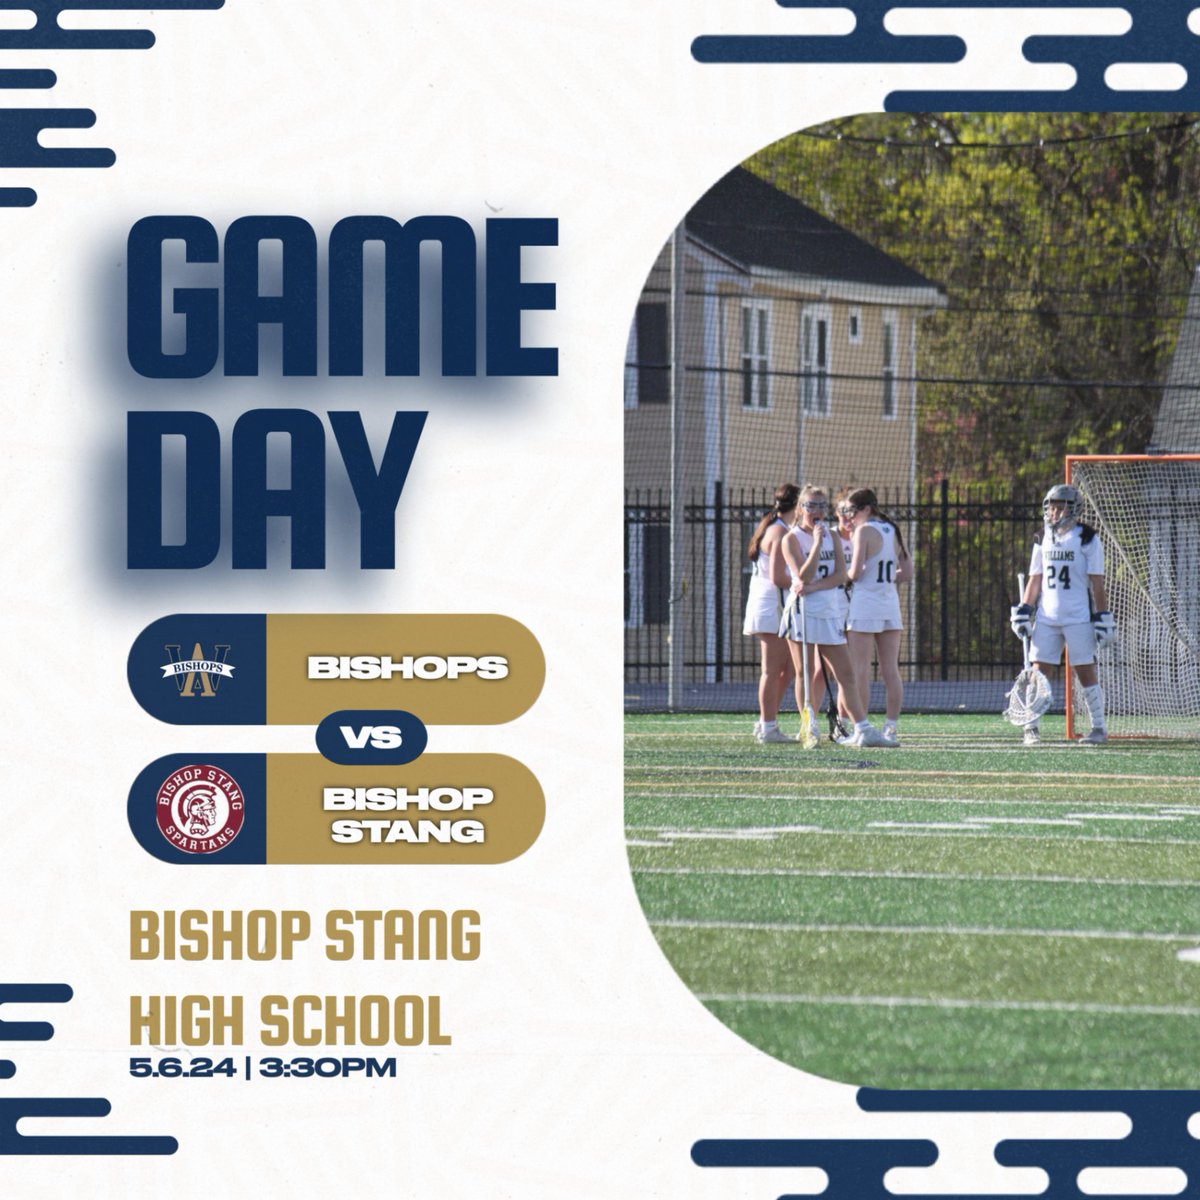 GIRLS LACROSSE: The Bishops head to Bishop Stang for a 3:30pm matchup! #rollbills @awhsglax